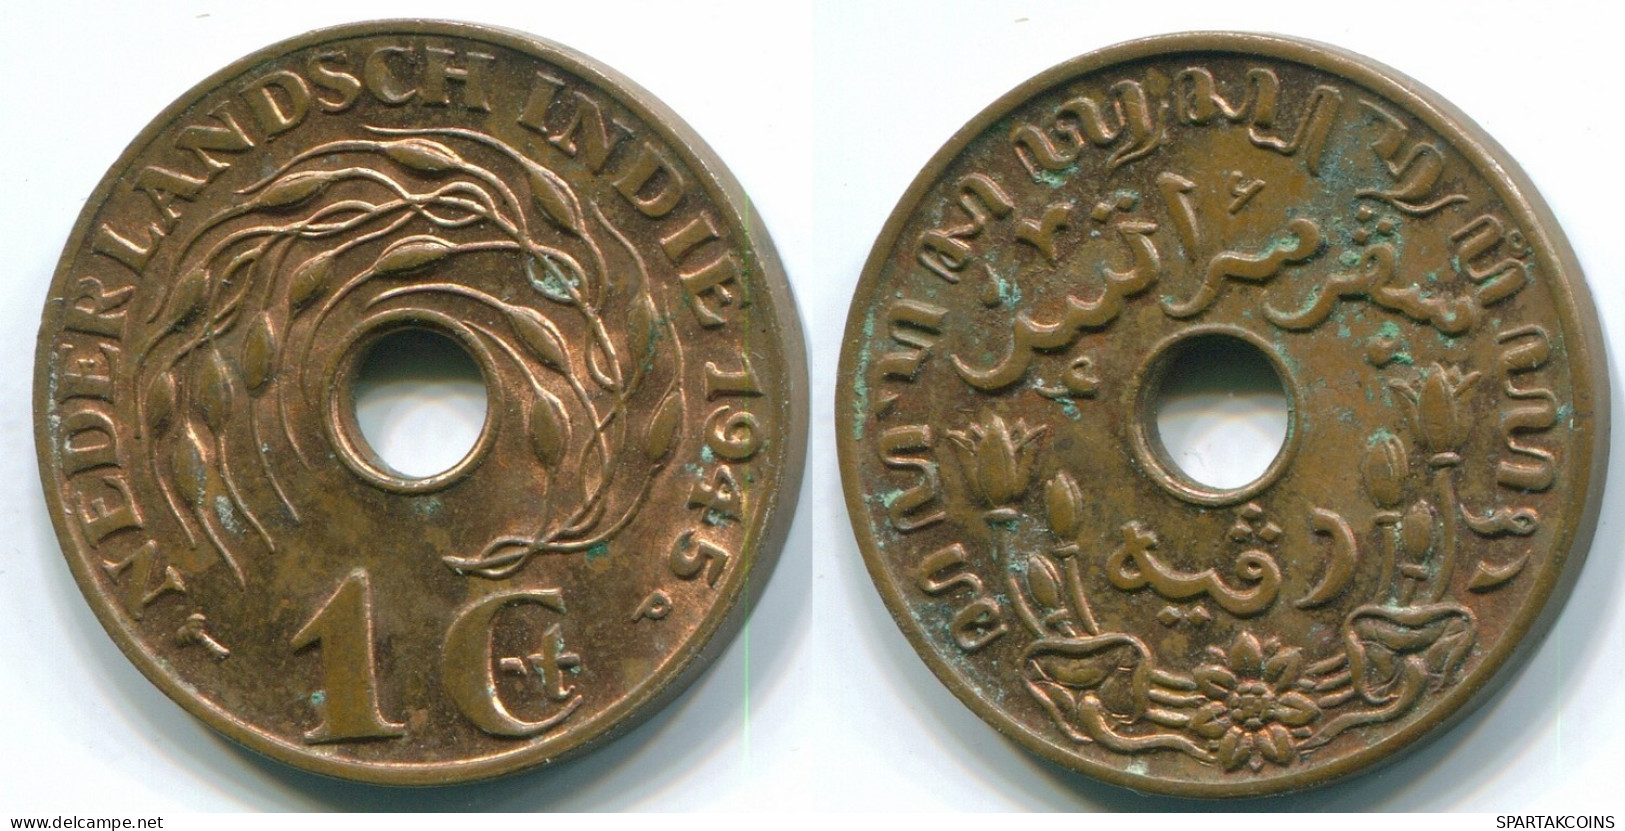 1 CENT 1945 P NETHERLANDS EAST INDIES INDONESIA Bronze Colonial Coin #S10355.U.A - Indes Néerlandaises